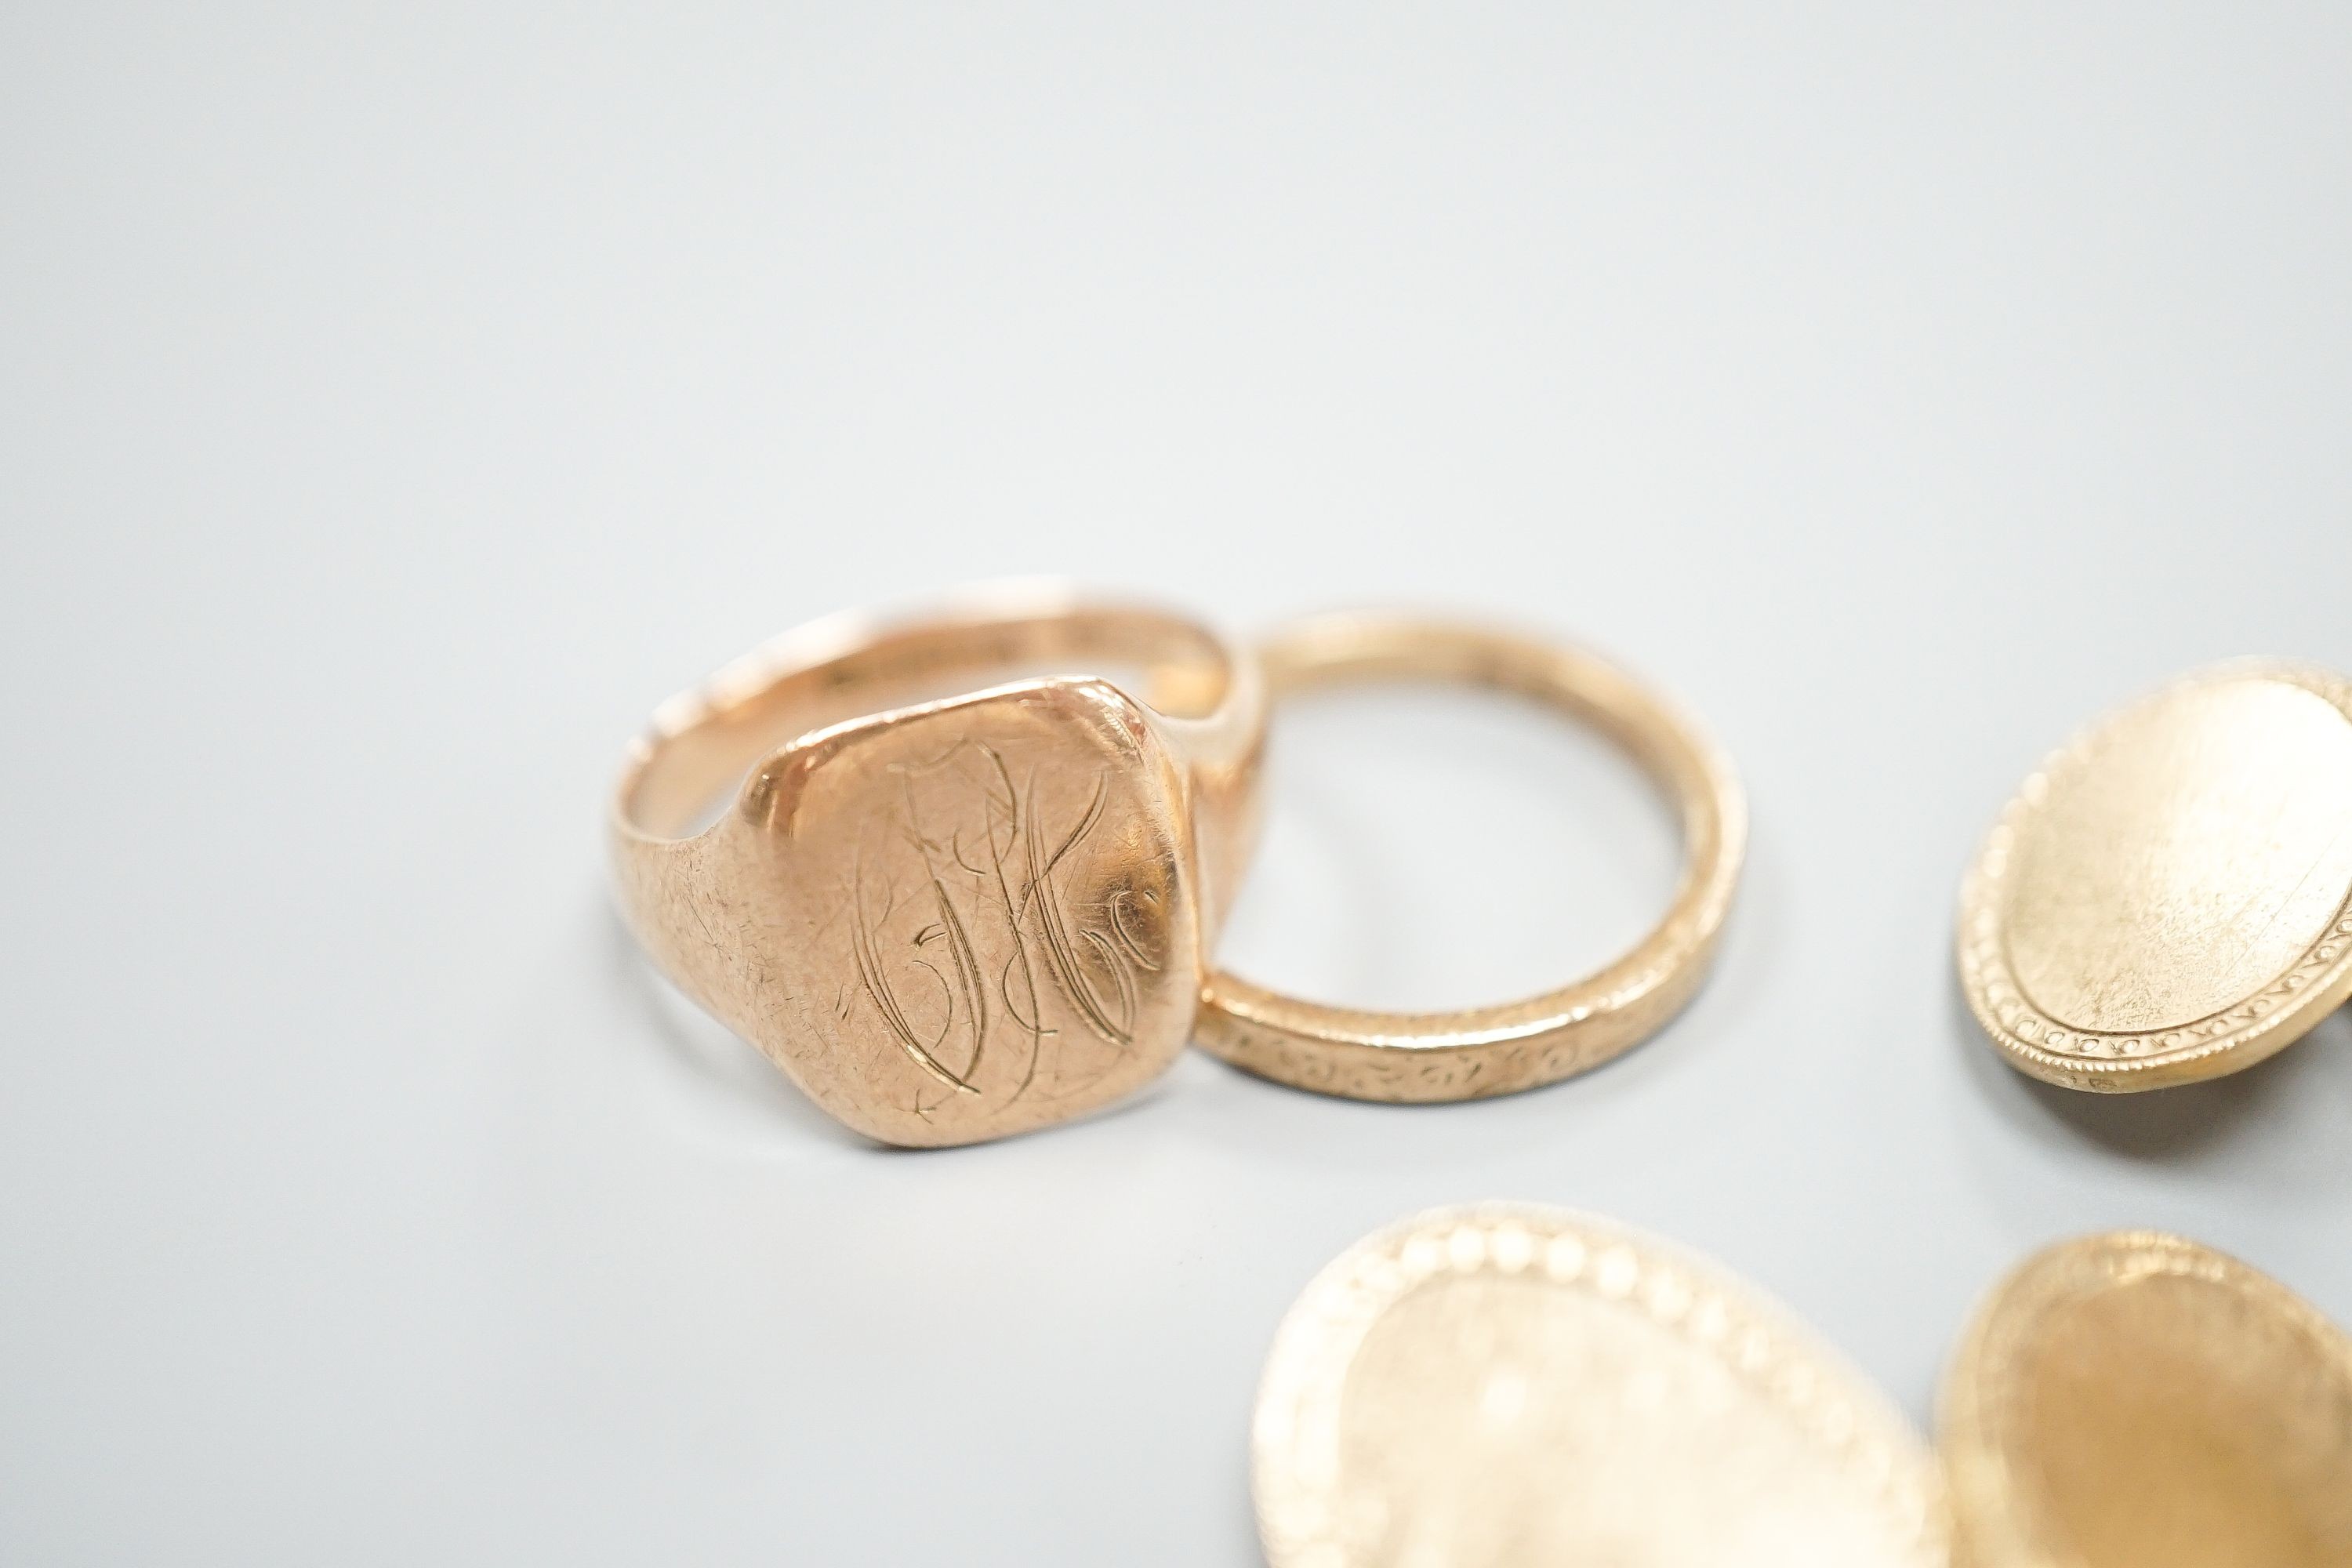 A 9ct gold wedding band, a 9ct gold signet ring and a pair of 9ct gold oval cufflinks